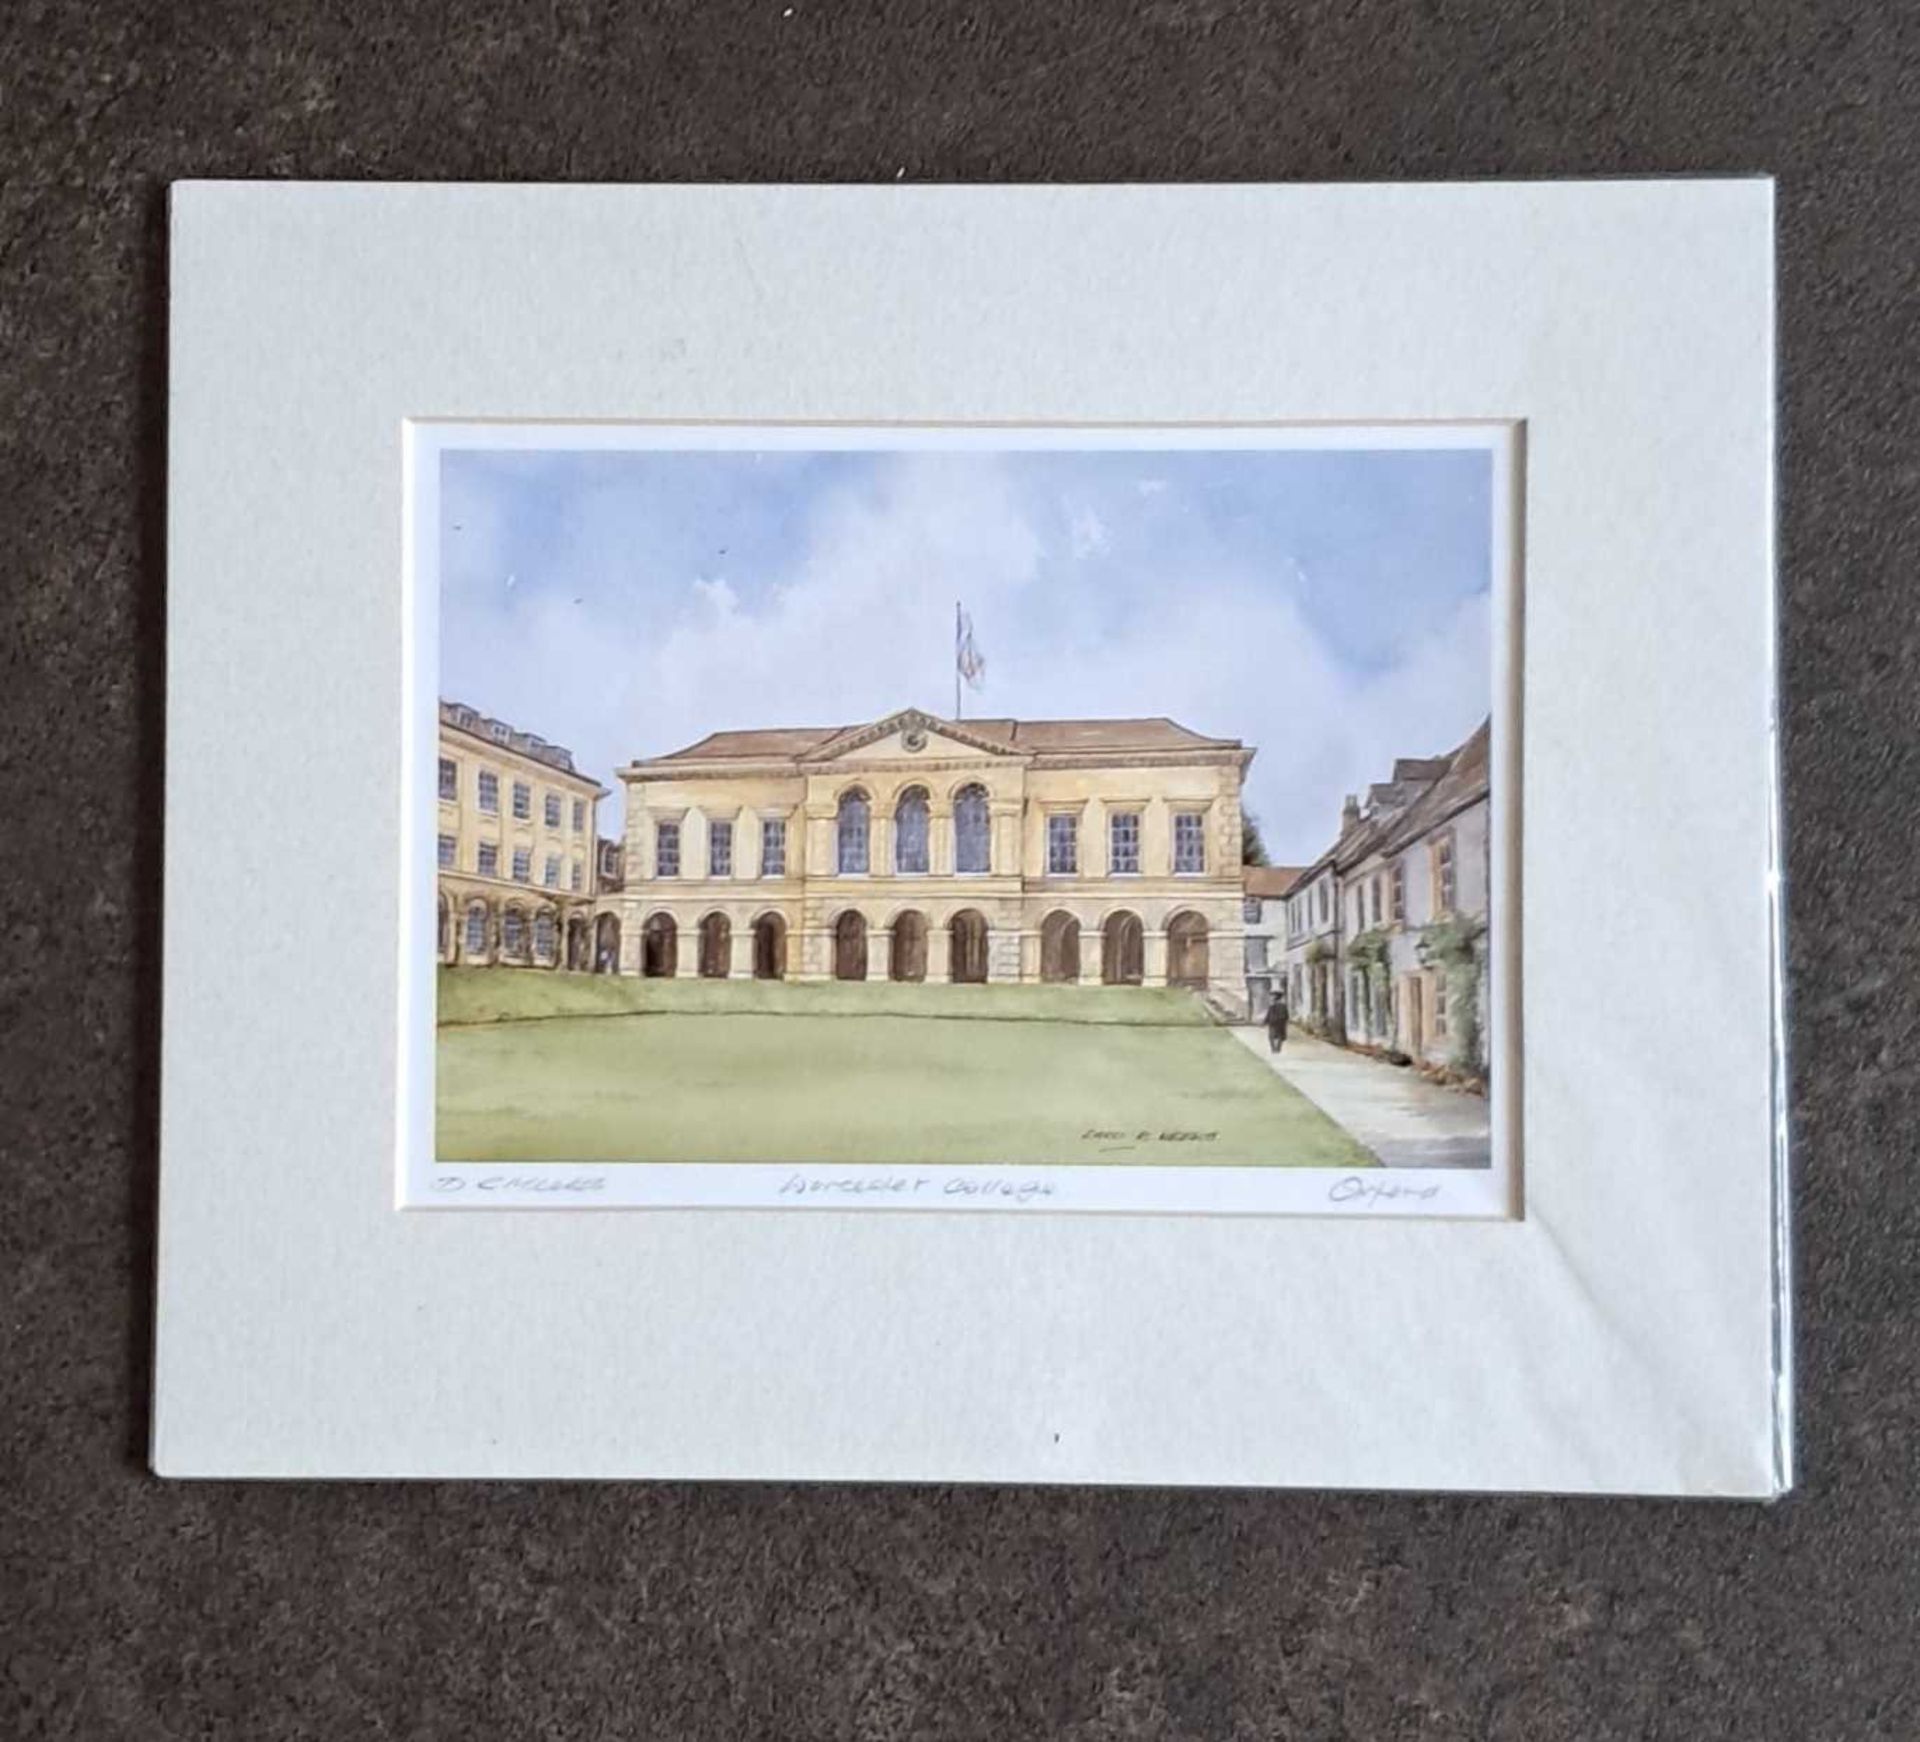 DAVID R MEEKS - WORCESTER COLLEGE LIMITED EDITION, 240 x 295 mm.